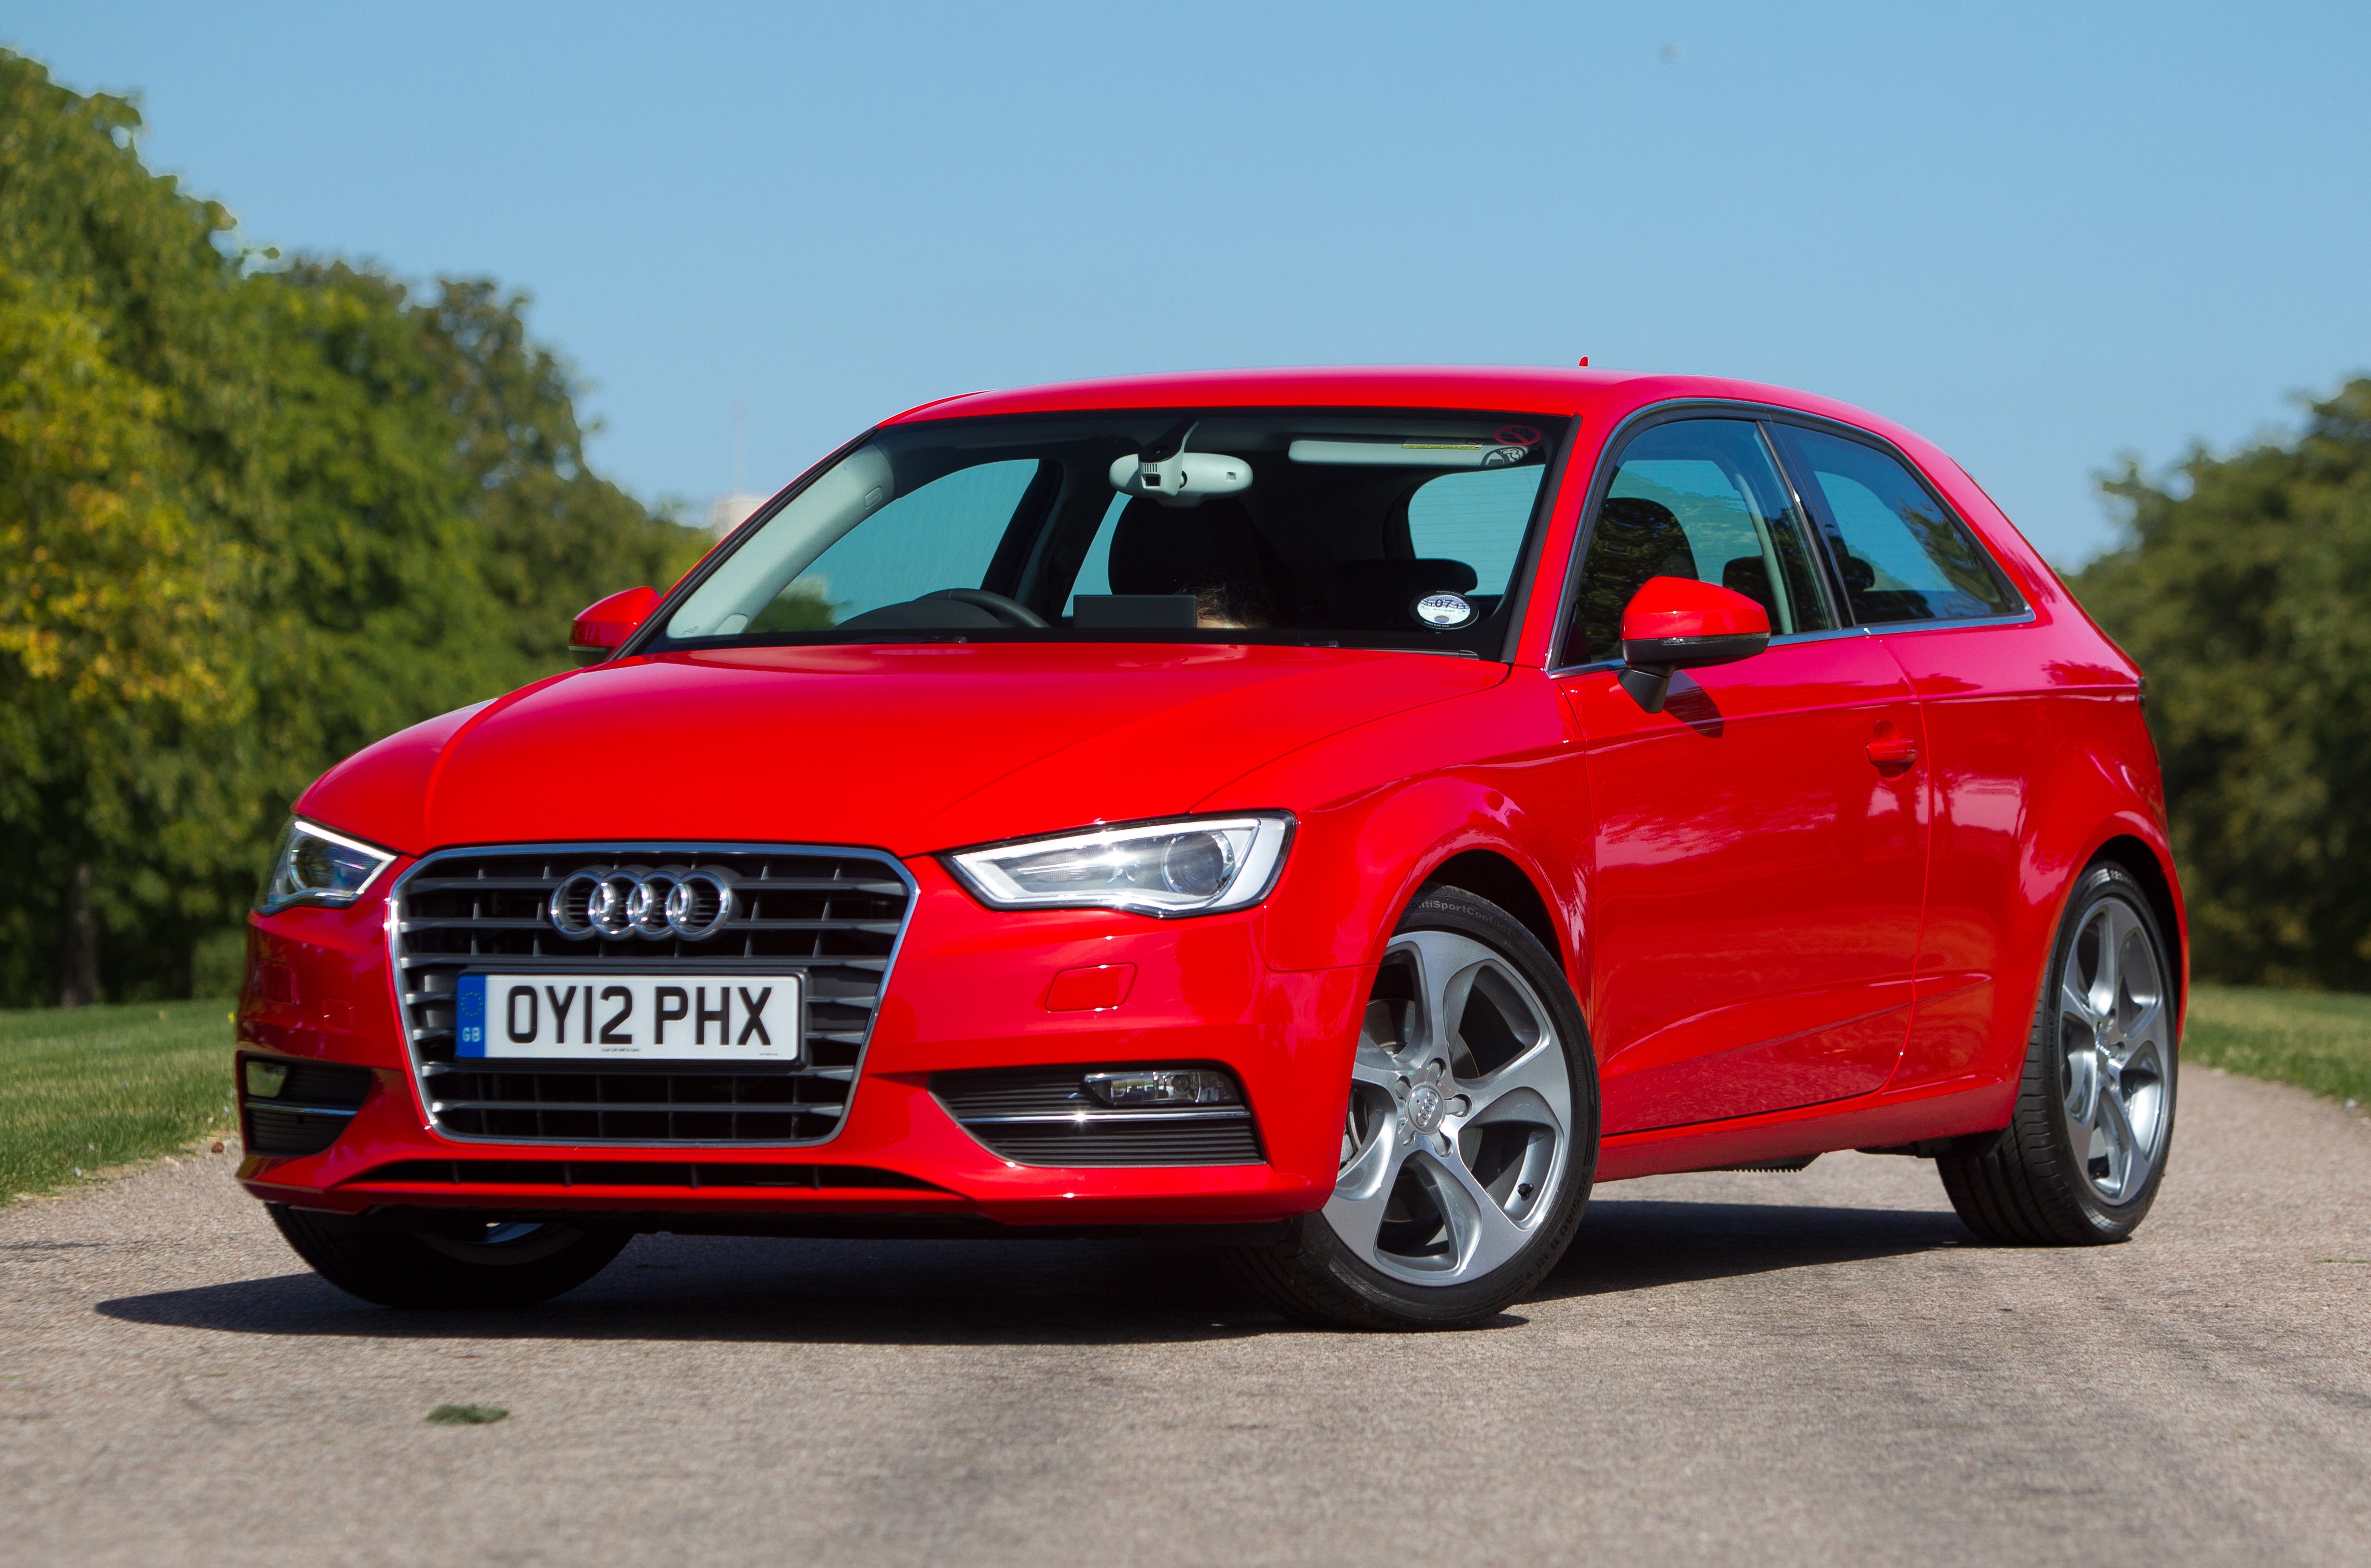 The Audi A3 offers a sporty image and great build quality